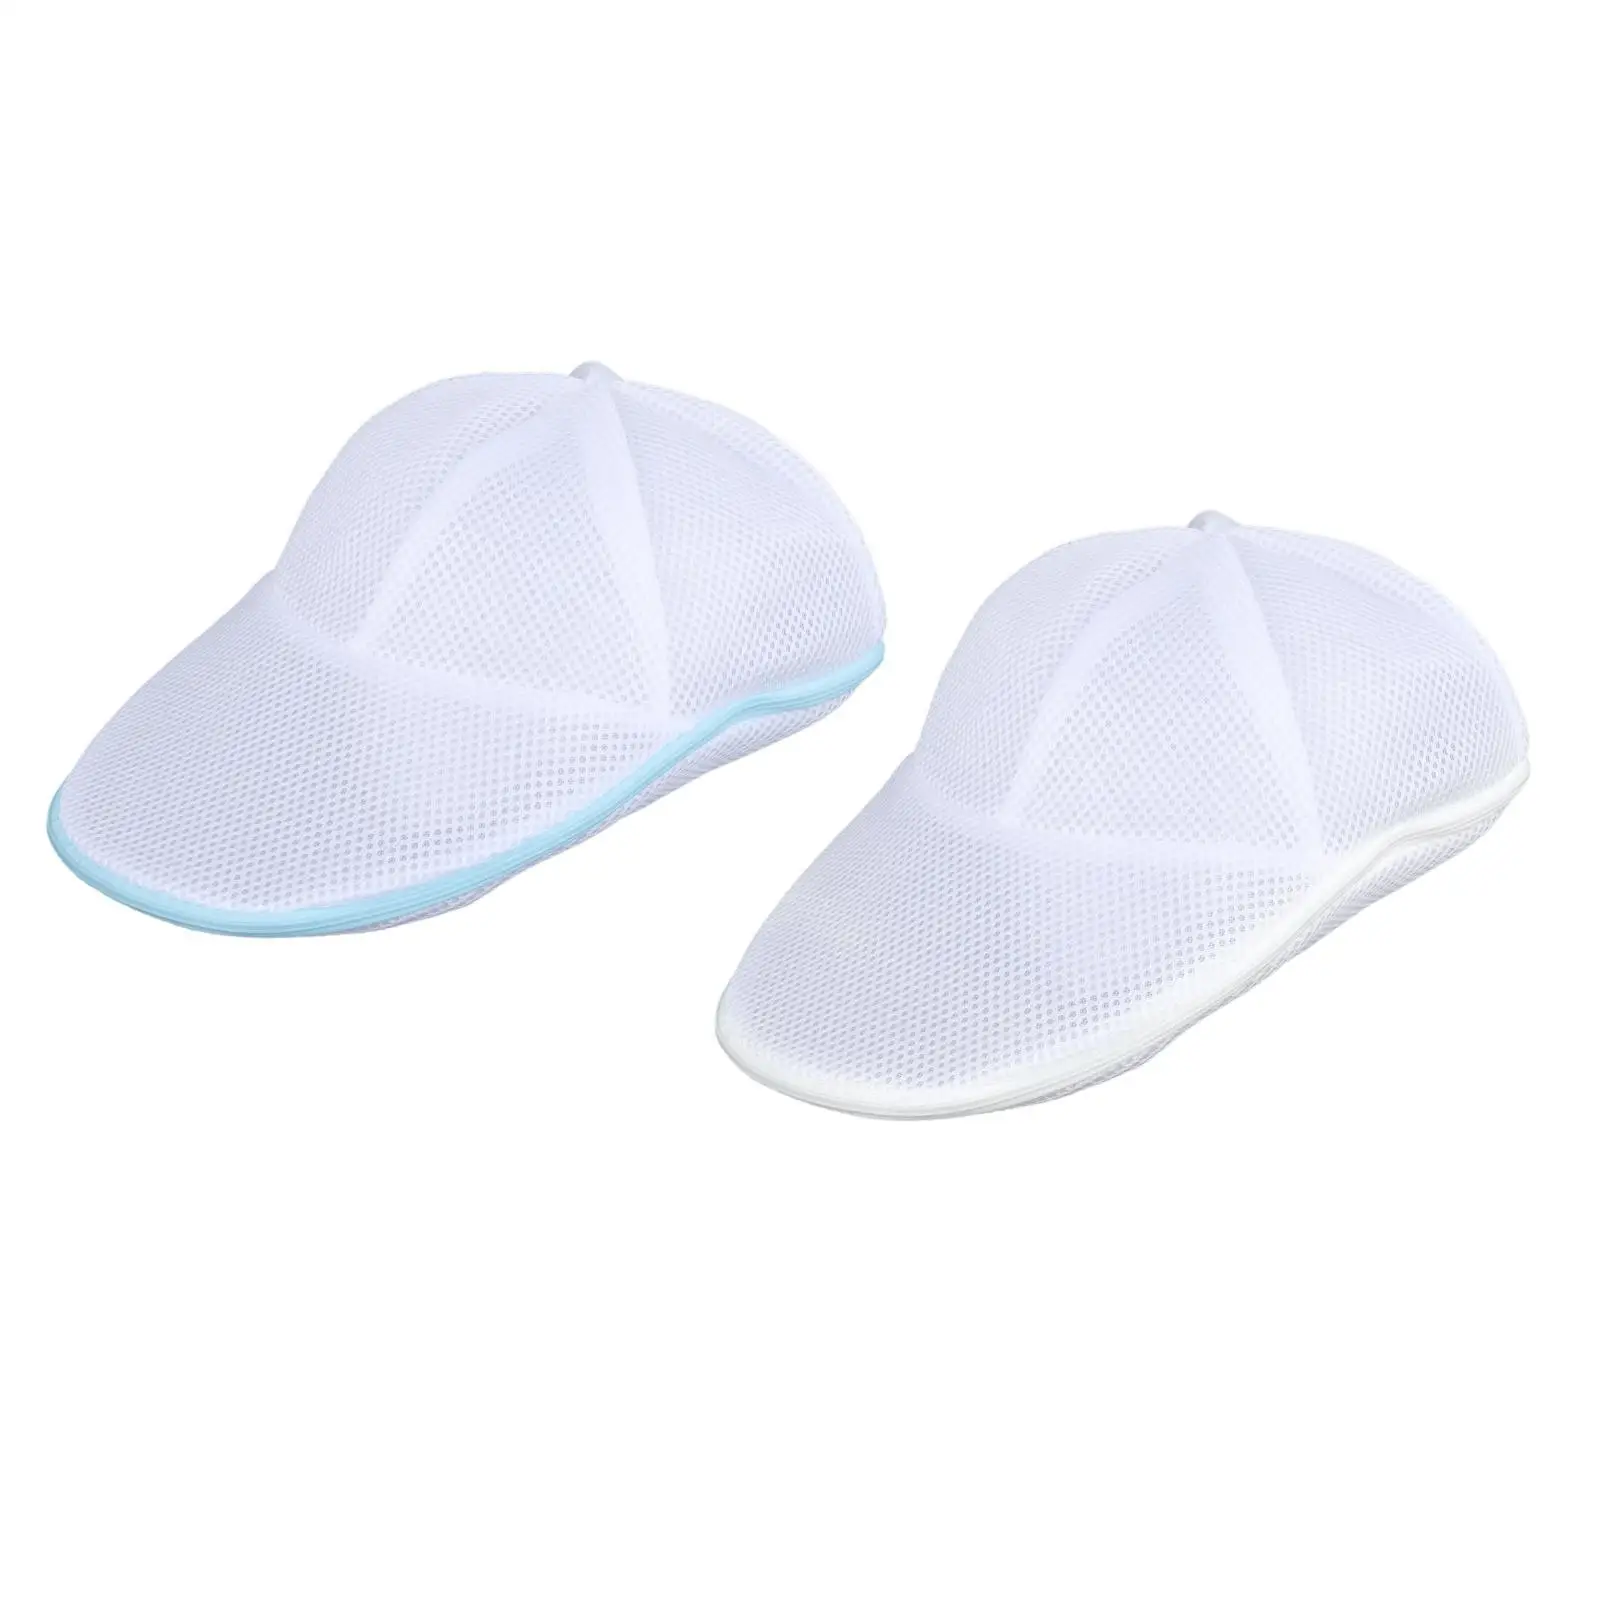 Hat Washer Cap Hat Organizer for Washing Machine to Protect Your Clothes from